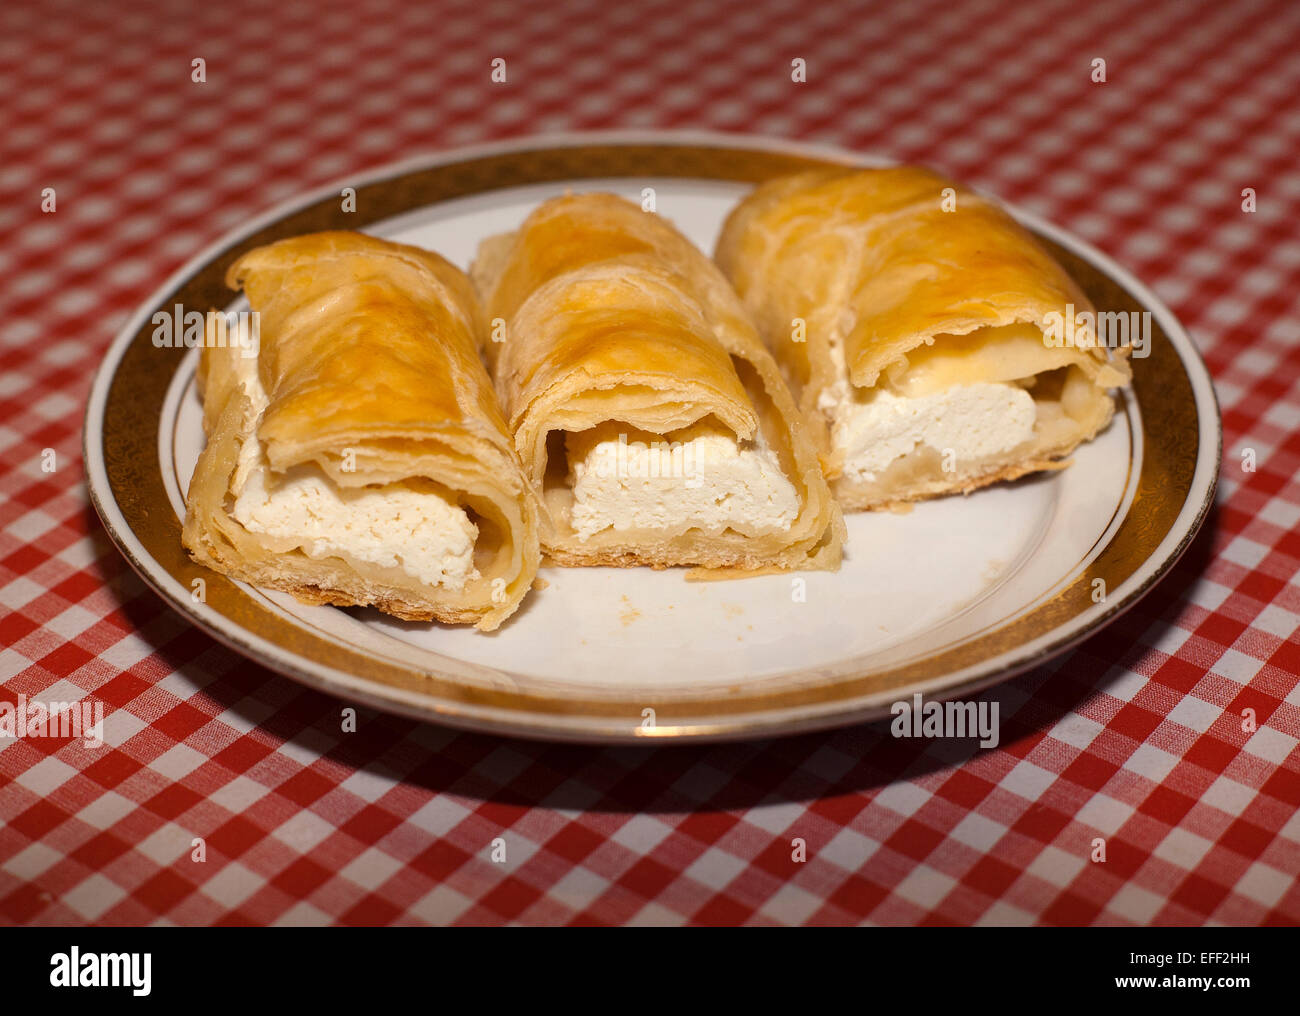 Cottage Cheese Strudel On Checkered Tablecloth Stock Photo